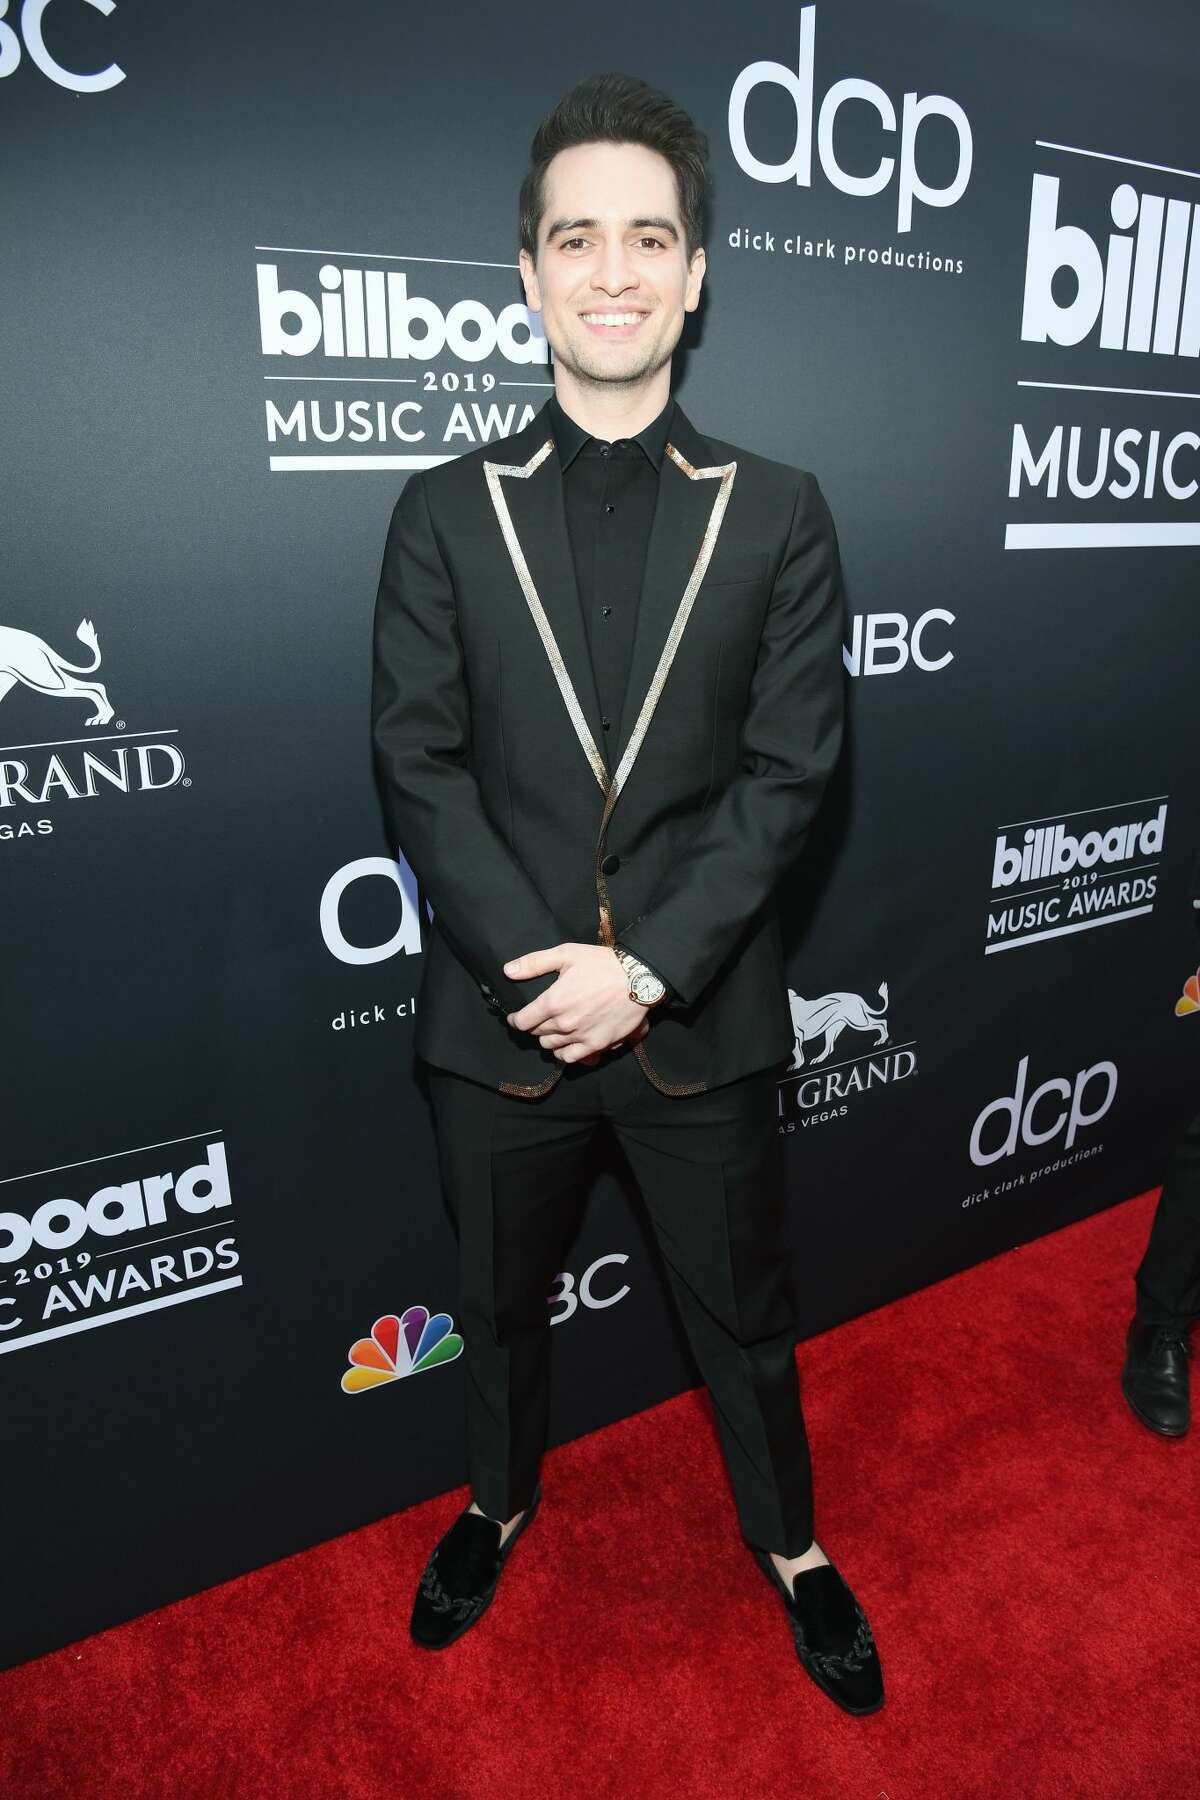 LAS VEGAS, NV - MAY 01: Brendon Urie of Panic! at the Disco attends the 2019 Billboard Music Awards at MGM Grand Garden Arena on May 1, 2019 in Las Vegas, Nevada. (Photo by Kevin Mazur/Getty Images for dcp)